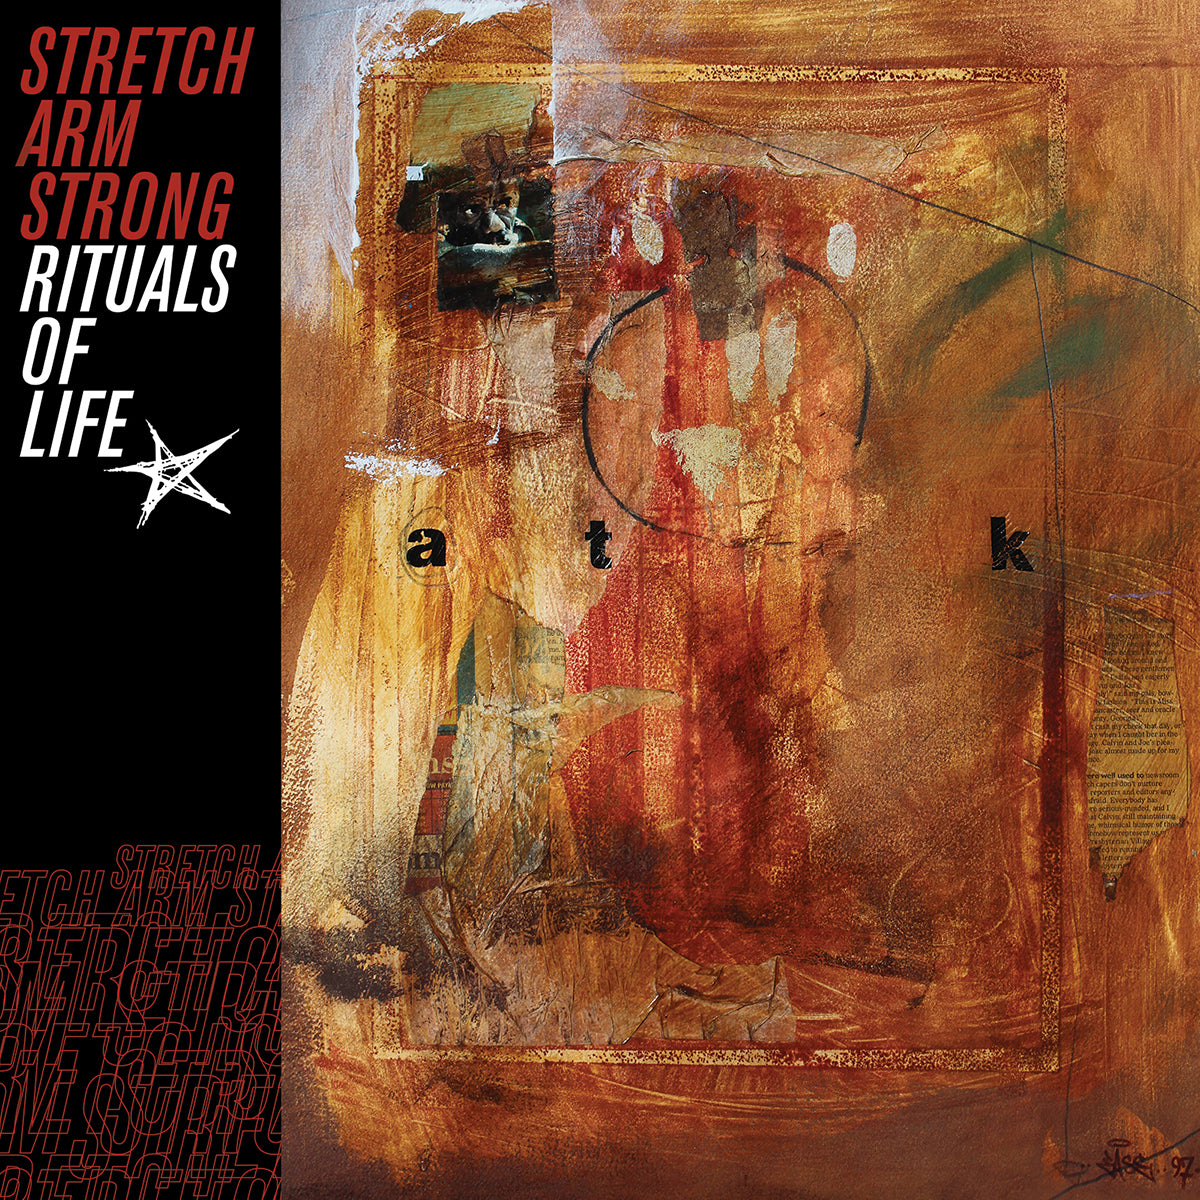 STRETCH ARM STRONG "Rituals Of Life" LP